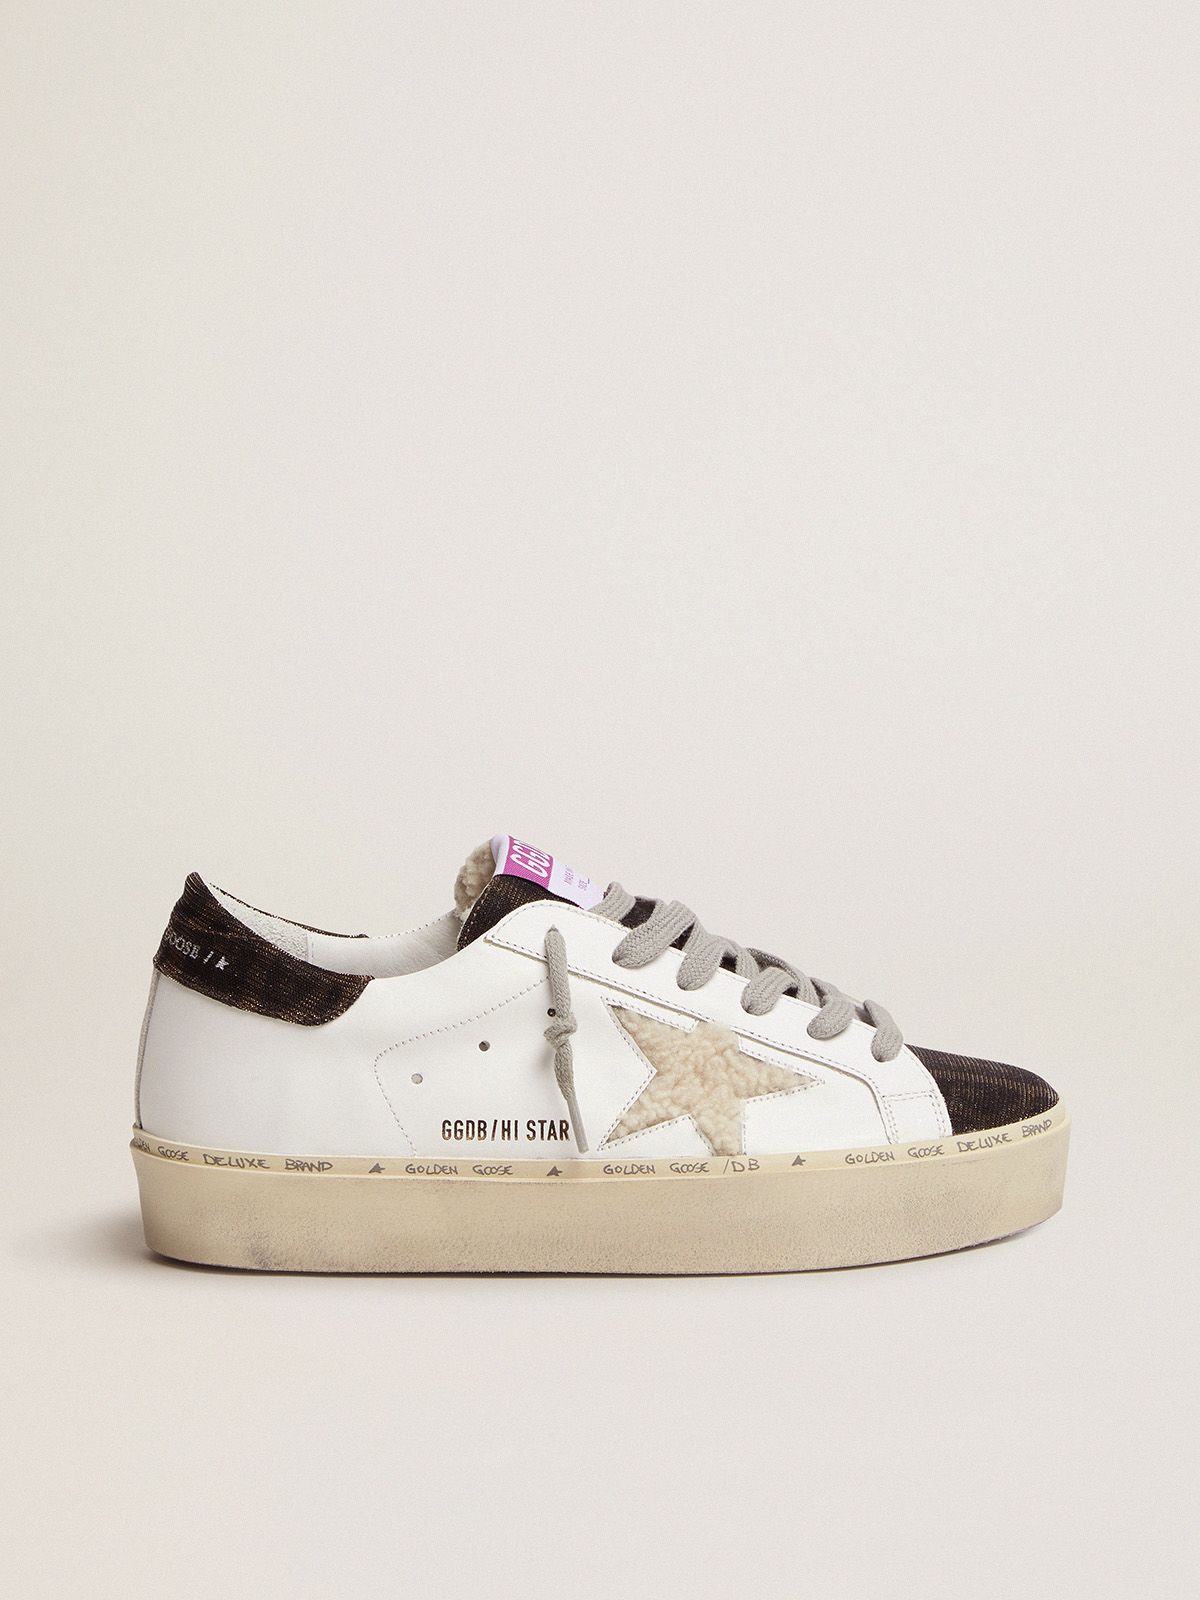 golden goose leopard-print star Star shearling tongue sneakers with Hi and